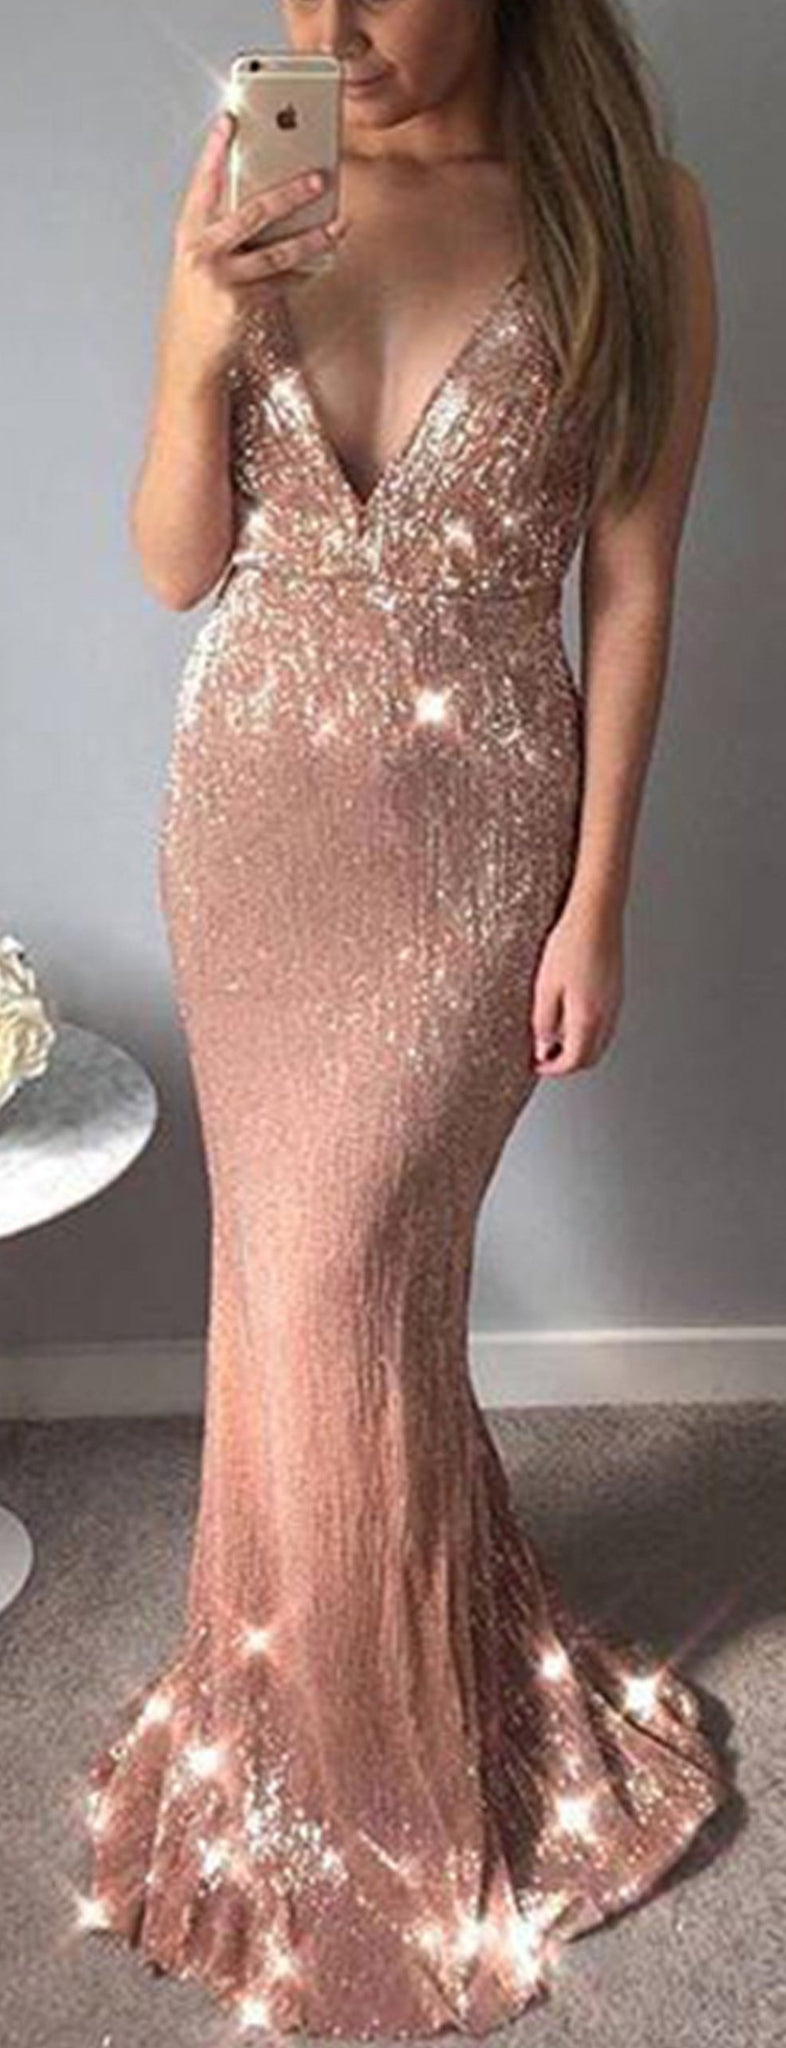 tight gold sparkly dress